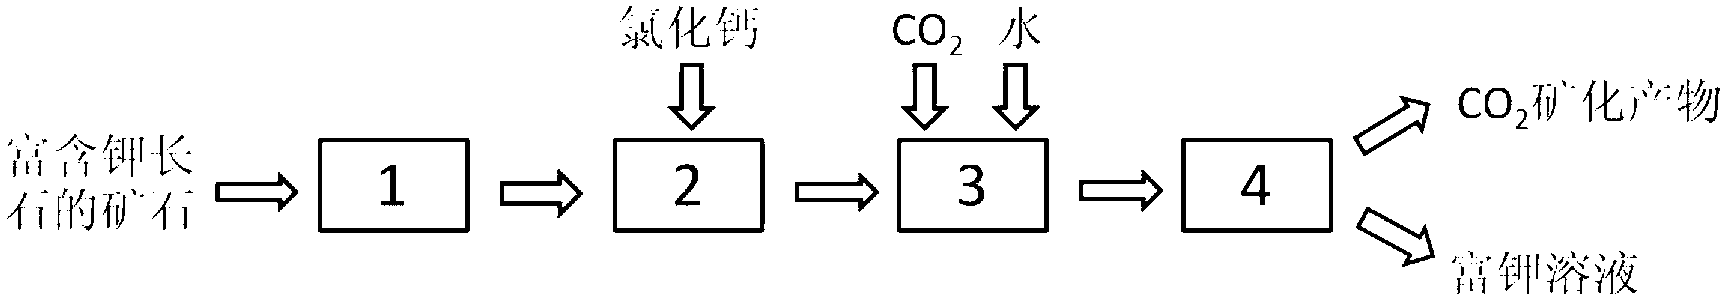 CO2 mineralization method capable of co-producing potassium-enriched solution by high temperature method